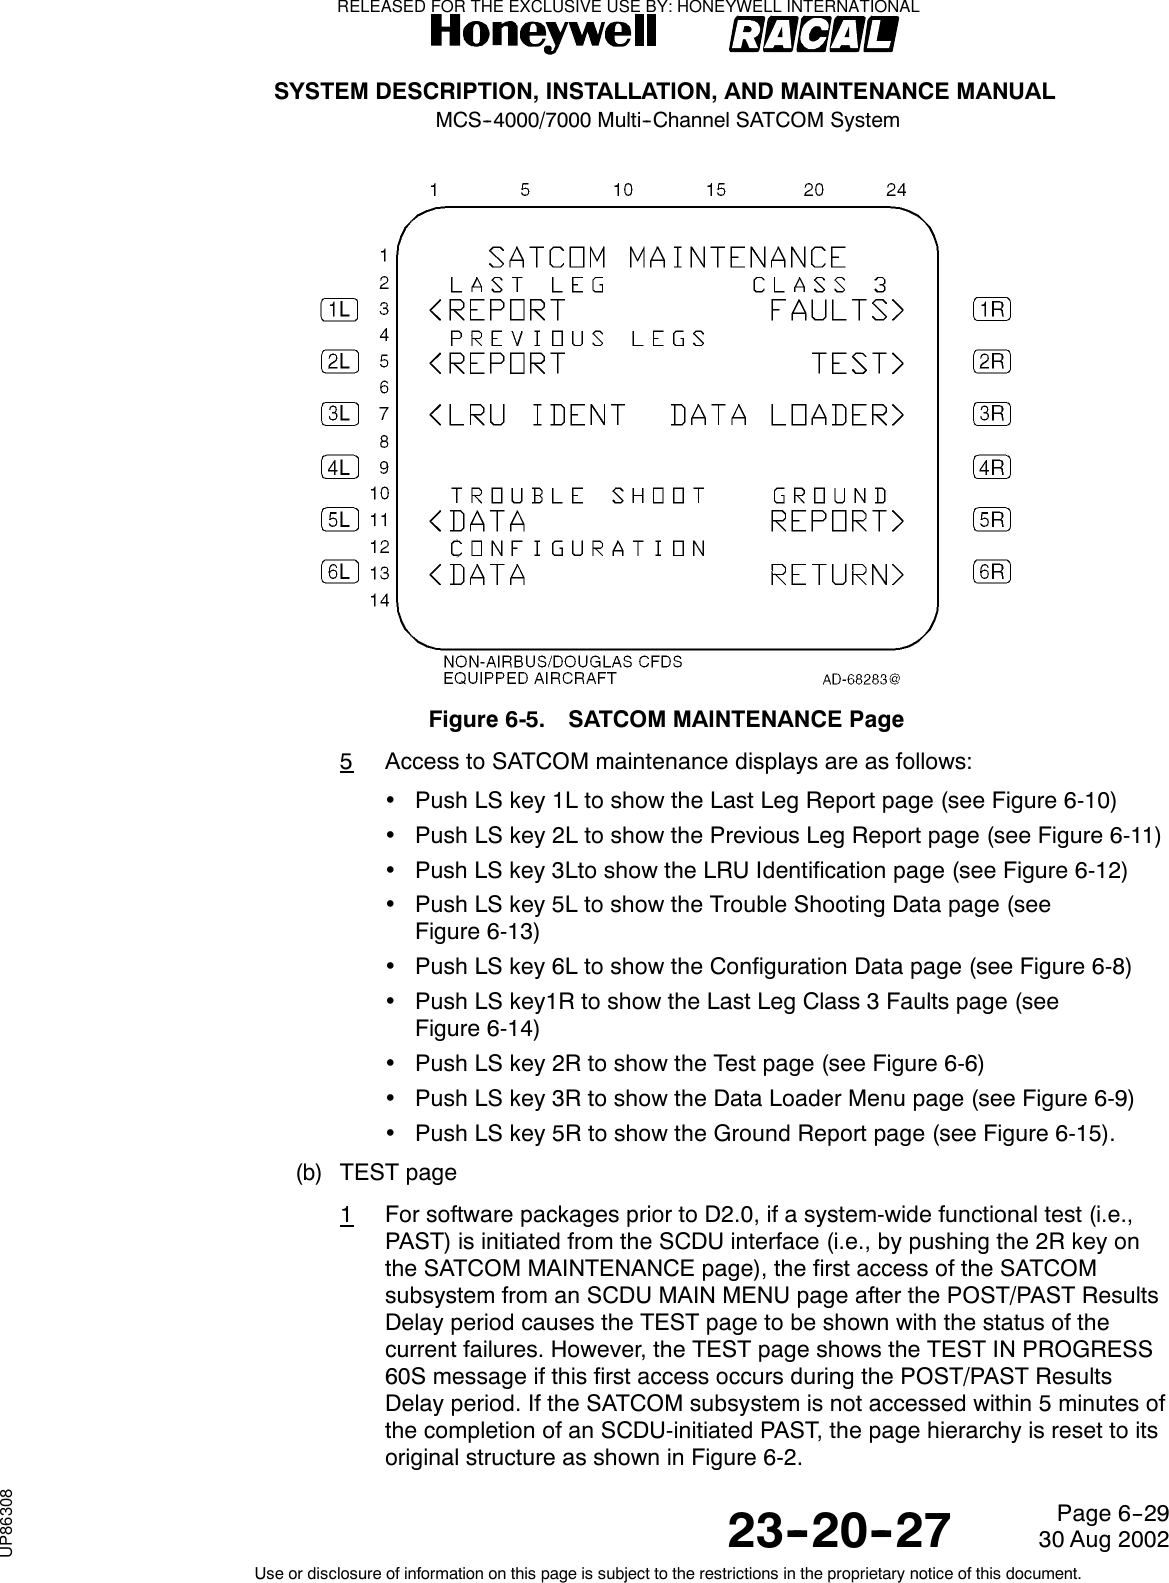 SYSTEM DESCRIPTION, INSTALLATION, AND MAINTENANCE MANUALMCS--4000/7000 Multi--Channel SATCOM System23--20--2730 Aug 2002Use or disclosure of information on this page is subject to the restrictions in the proprietary notice of this document.Page 6--29Figure 6-5. SATCOM MAINTENANCE Page5Access to SATCOM maintenance displays are as follows:•Push LS key 1L to show the Last Leg Report page (see Figure 6-10)•Push LS key 2L to show the Previous Leg Report page (see Figure 6-11)•Push LS key 3Lto show the LRU Identification page (see Figure 6-12)•Push LS key 5L to show the Trouble Shooting Data page (seeFigure 6-13)•Push LS key 6L to show the Configuration Data page (see Figure 6-8)•Push LS key1R to show the Last Leg Class 3 Faults page (seeFigure 6-14)•Push LS key 2R to show the Test page (see Figure 6-6)•Push LS key 3R to show the Data Loader Menu page (see Figure 6-9)•Push LS key 5R to show the Ground Report page (see Figure 6-15).(b) TEST page1For software packages prior to D2.0, if a system-wide functional test (i.e.,PAST) is initiated from the SCDU interface (i.e., by pushing the 2R key onthe SATCOM MAINTENANCE page), the first access of the SATCOMsubsystem from an SCDU MAIN MENU page after the POST/PAST ResultsDelay period causes the TEST page to be shown with the status of thecurrent failures. However, the TEST page shows the TEST IN PROGRESS60S message if this first access occurs during the POST/PAST ResultsDelay period. If the SATCOM subsystem is not accessed within 5 minutes ofthe completion of an SCDU-initiated PAST, the page hierarchy is reset to itsoriginal structure as shown in Figure 6-2.RELEASED FOR THE EXCLUSIVE USE BY: HONEYWELL INTERNATIONALUP86308